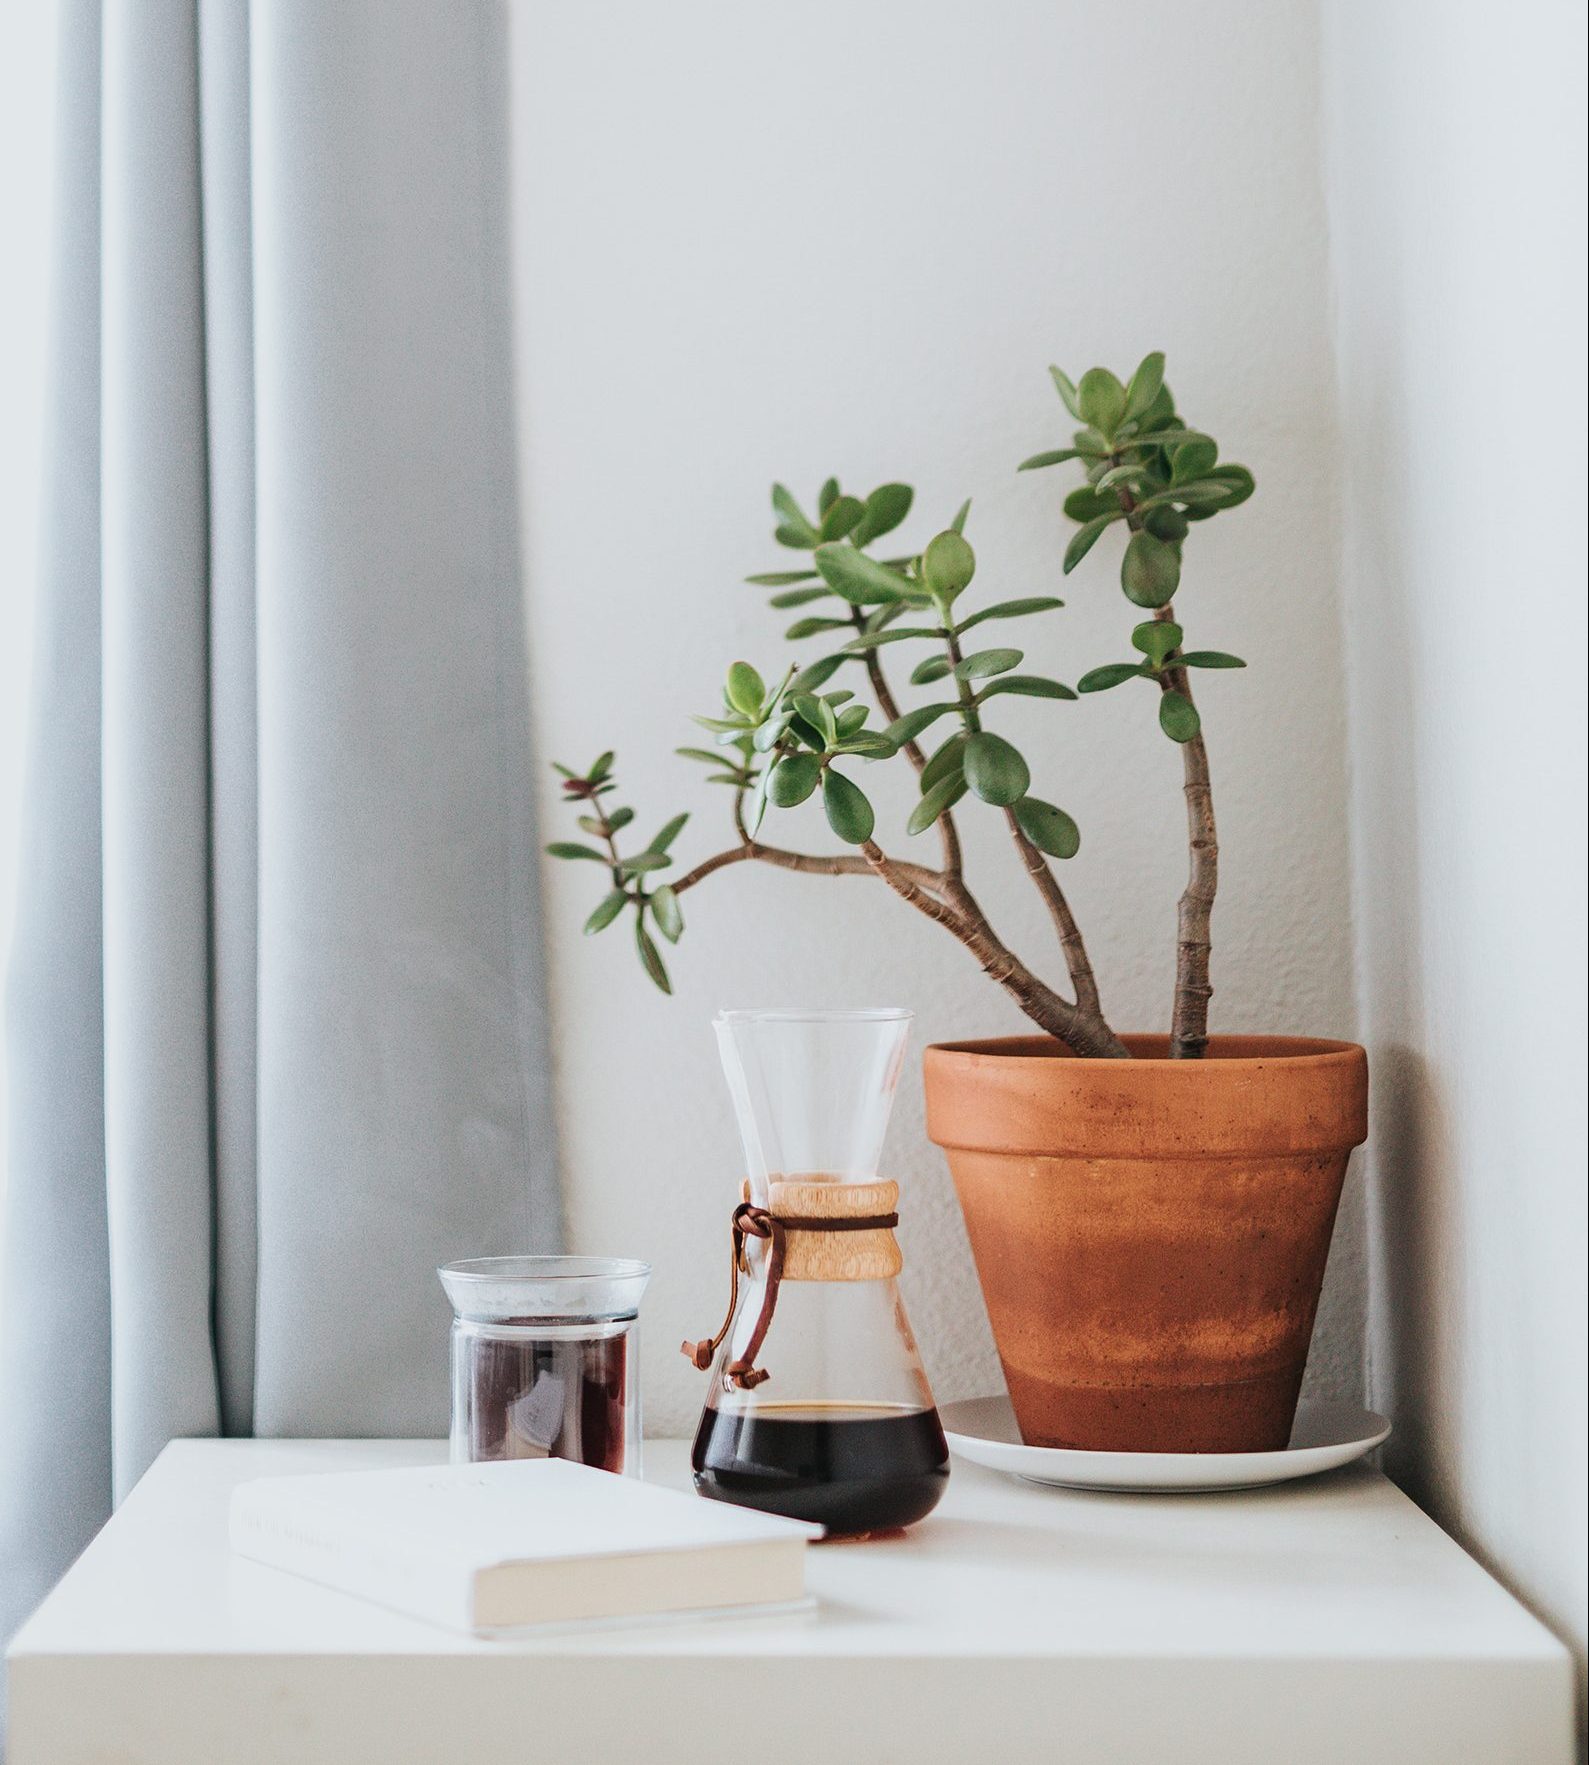 Coffee and plant